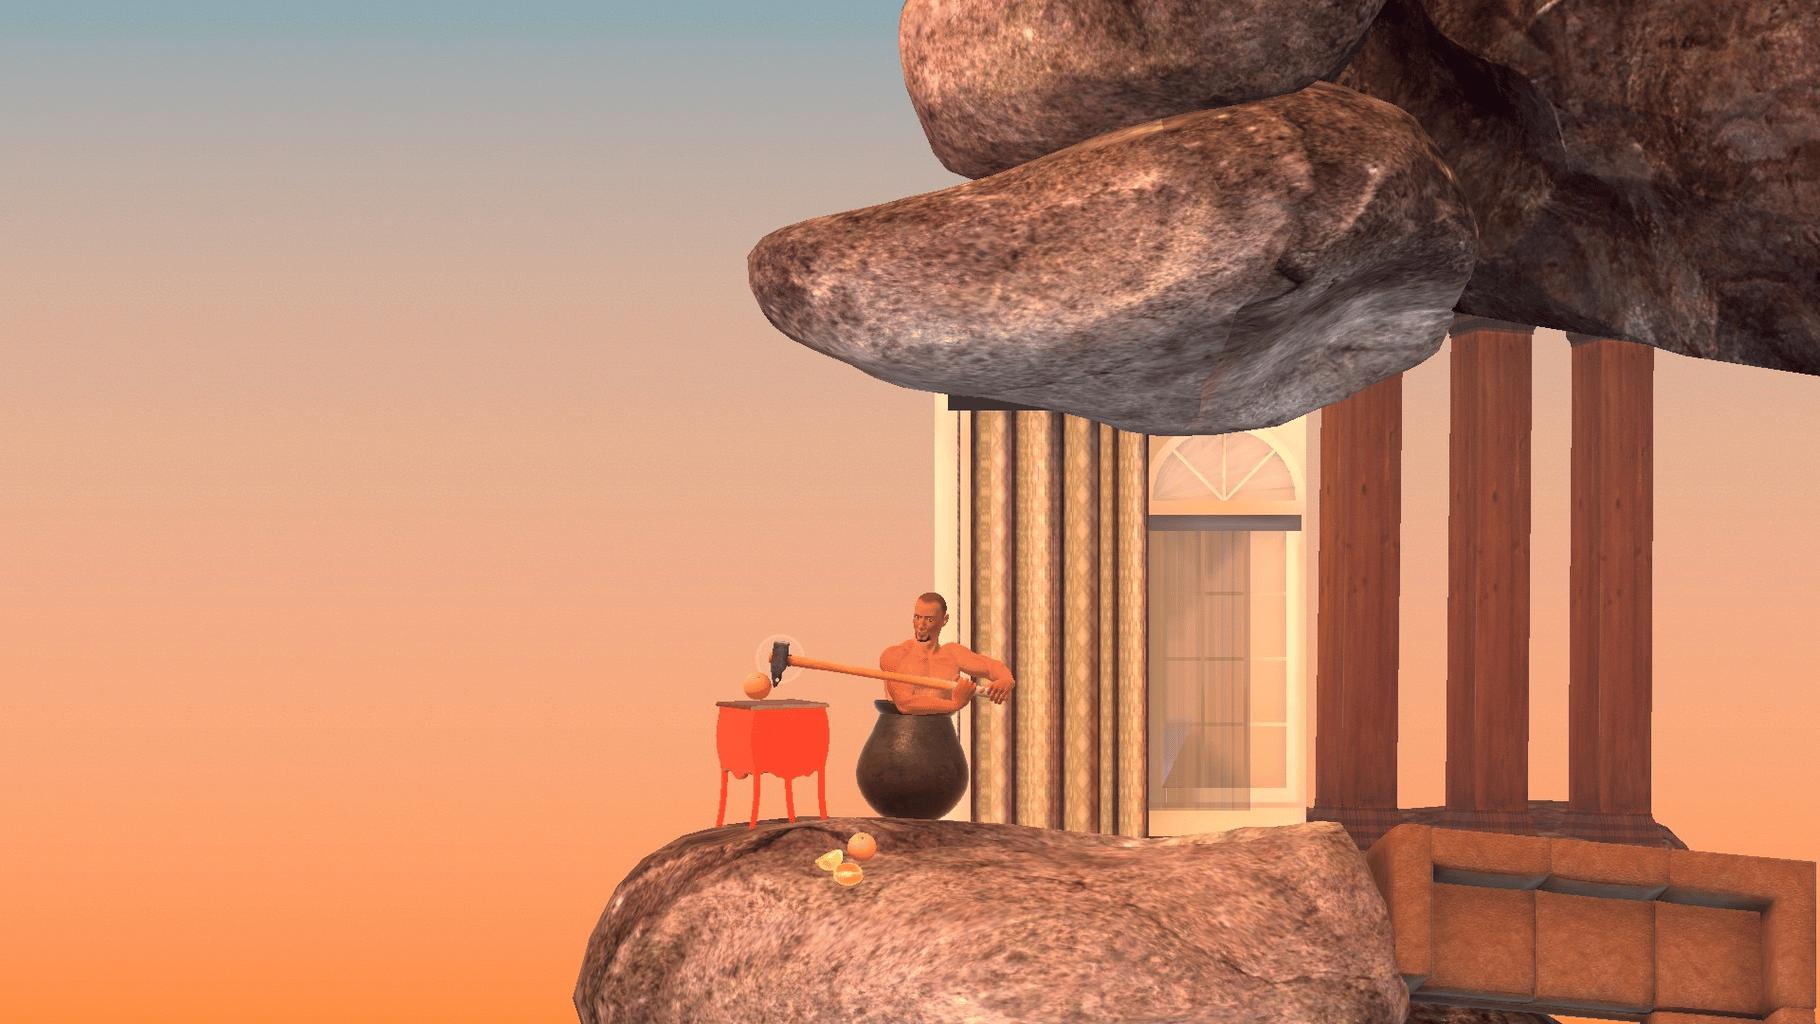 Getting Over It with Bennett Foddy 